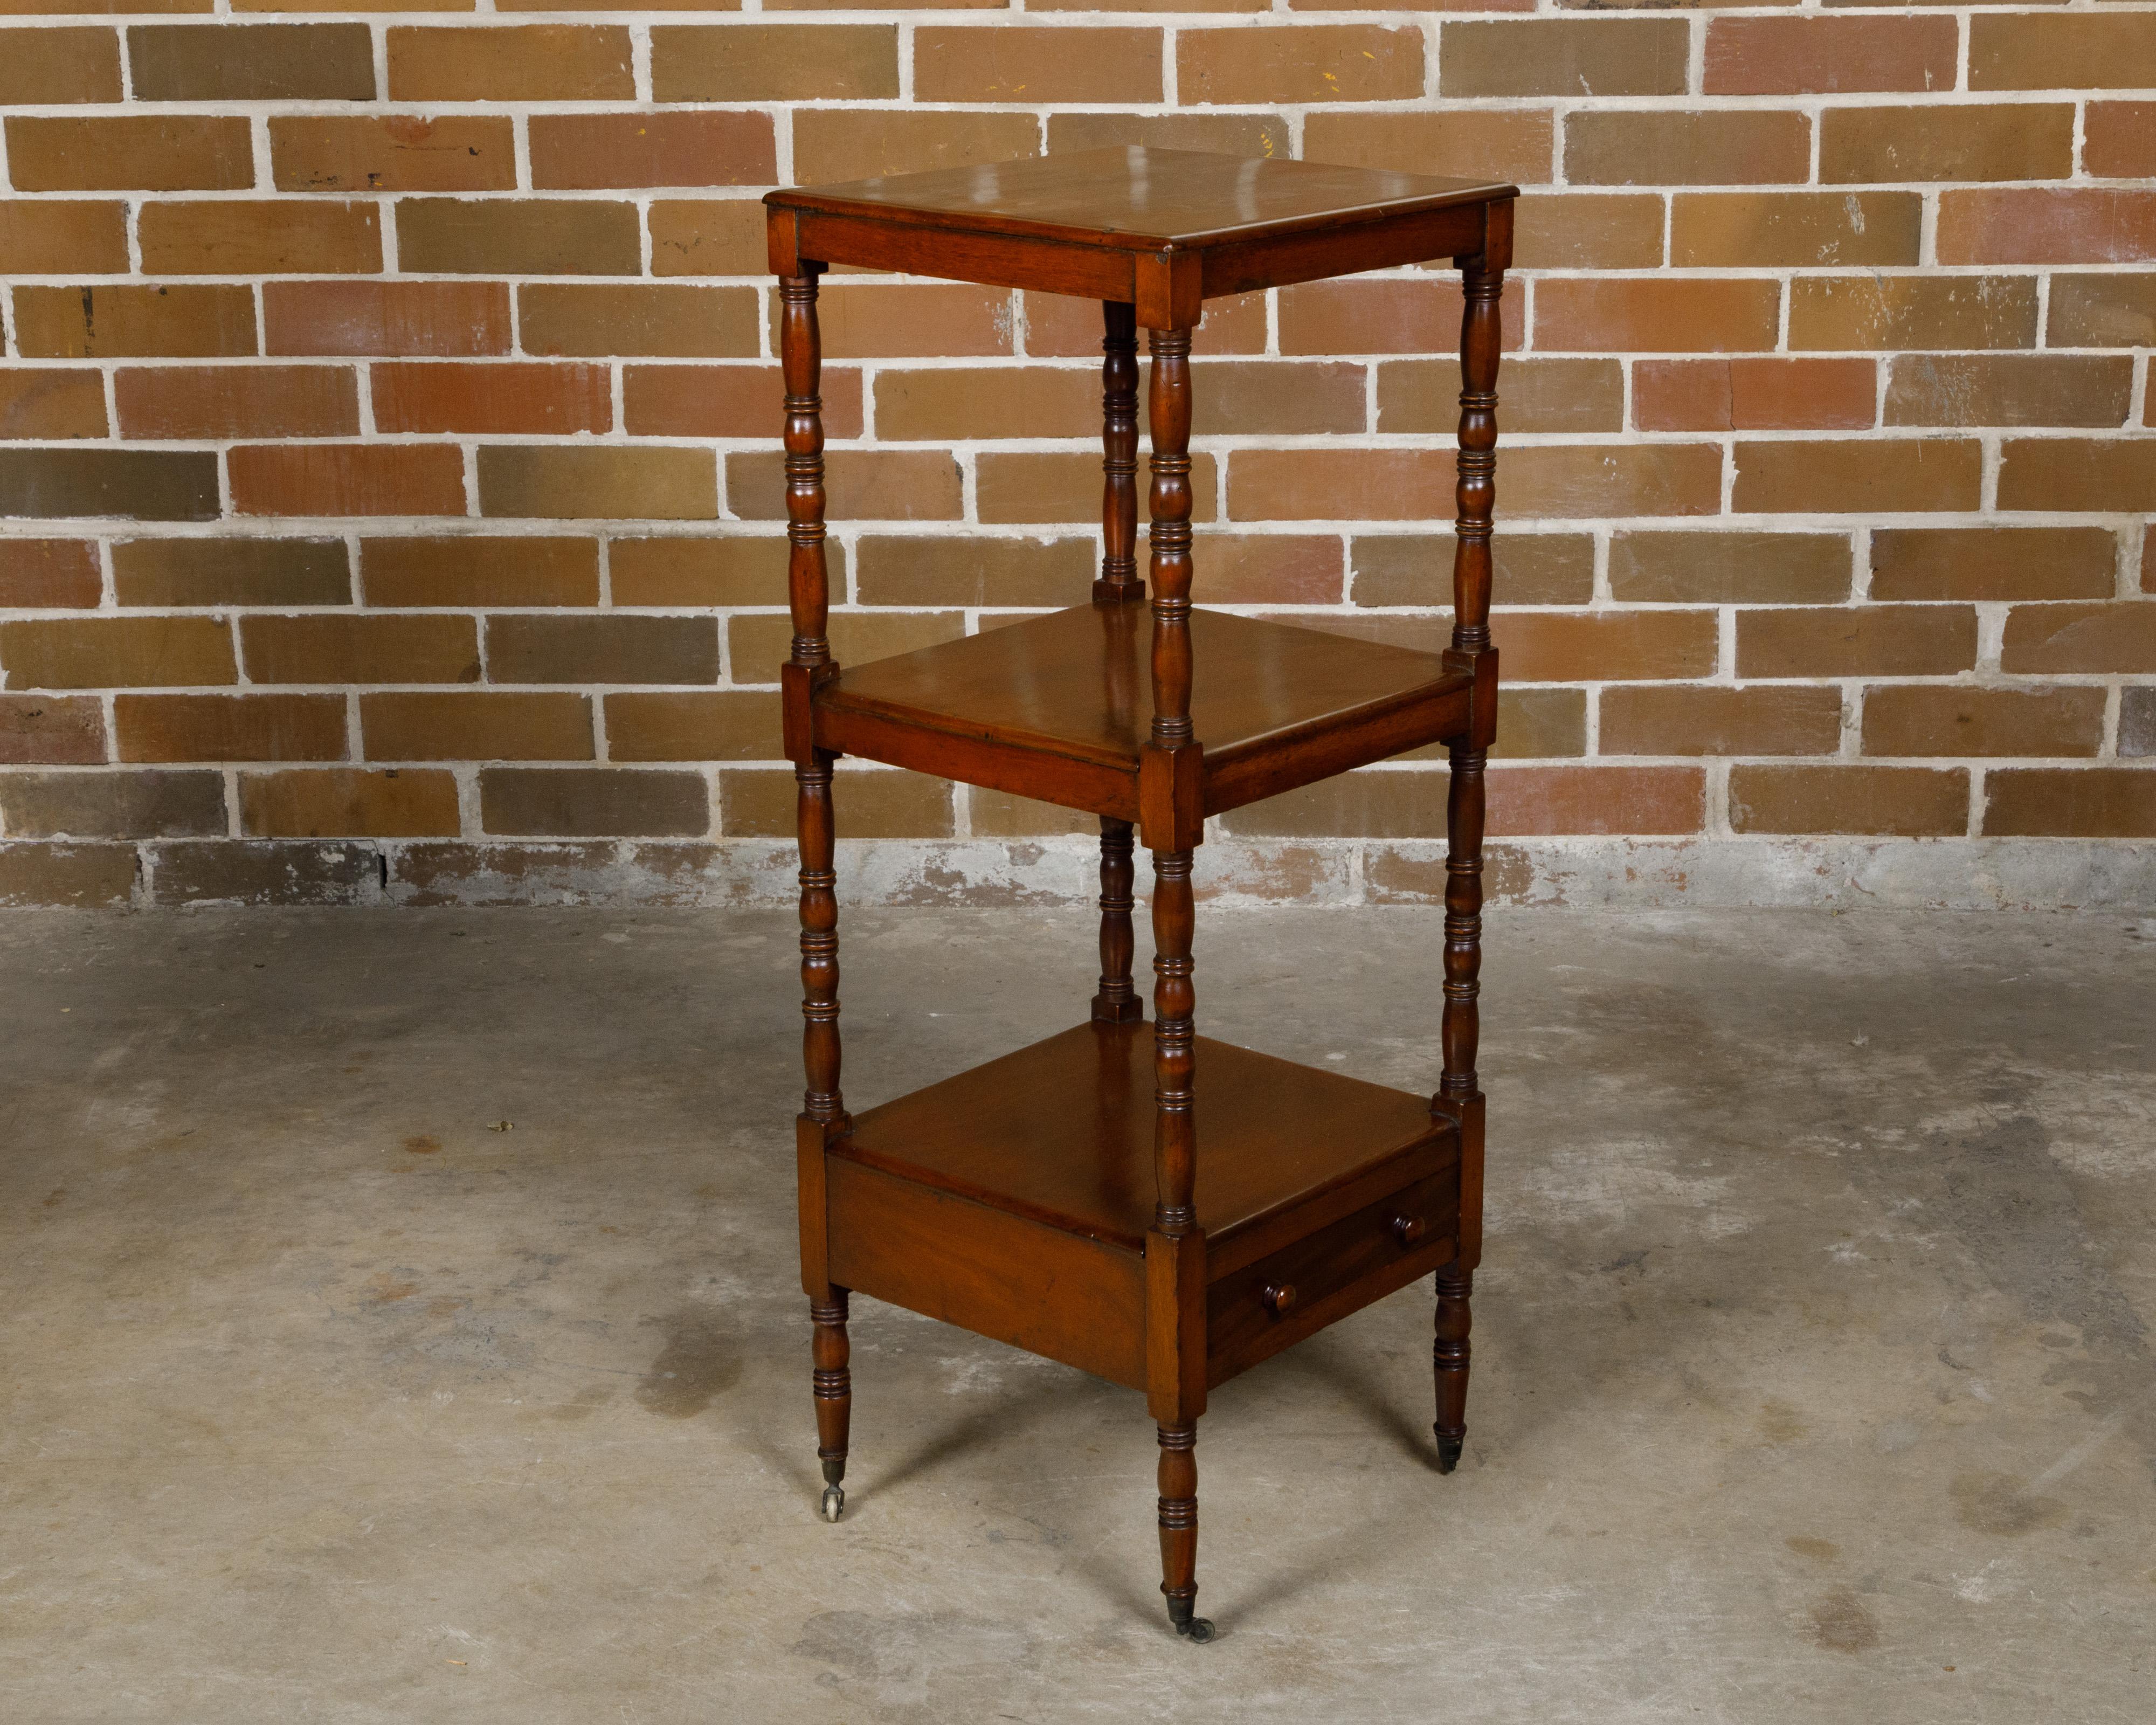 An English mahogany three-tiered étagère from the 19th century with lower drawer, turned supports and casters. This exquisite English mahogany étagère, hailing from the 19th century, elegantly stands on casters, offering both mobility and grace. It